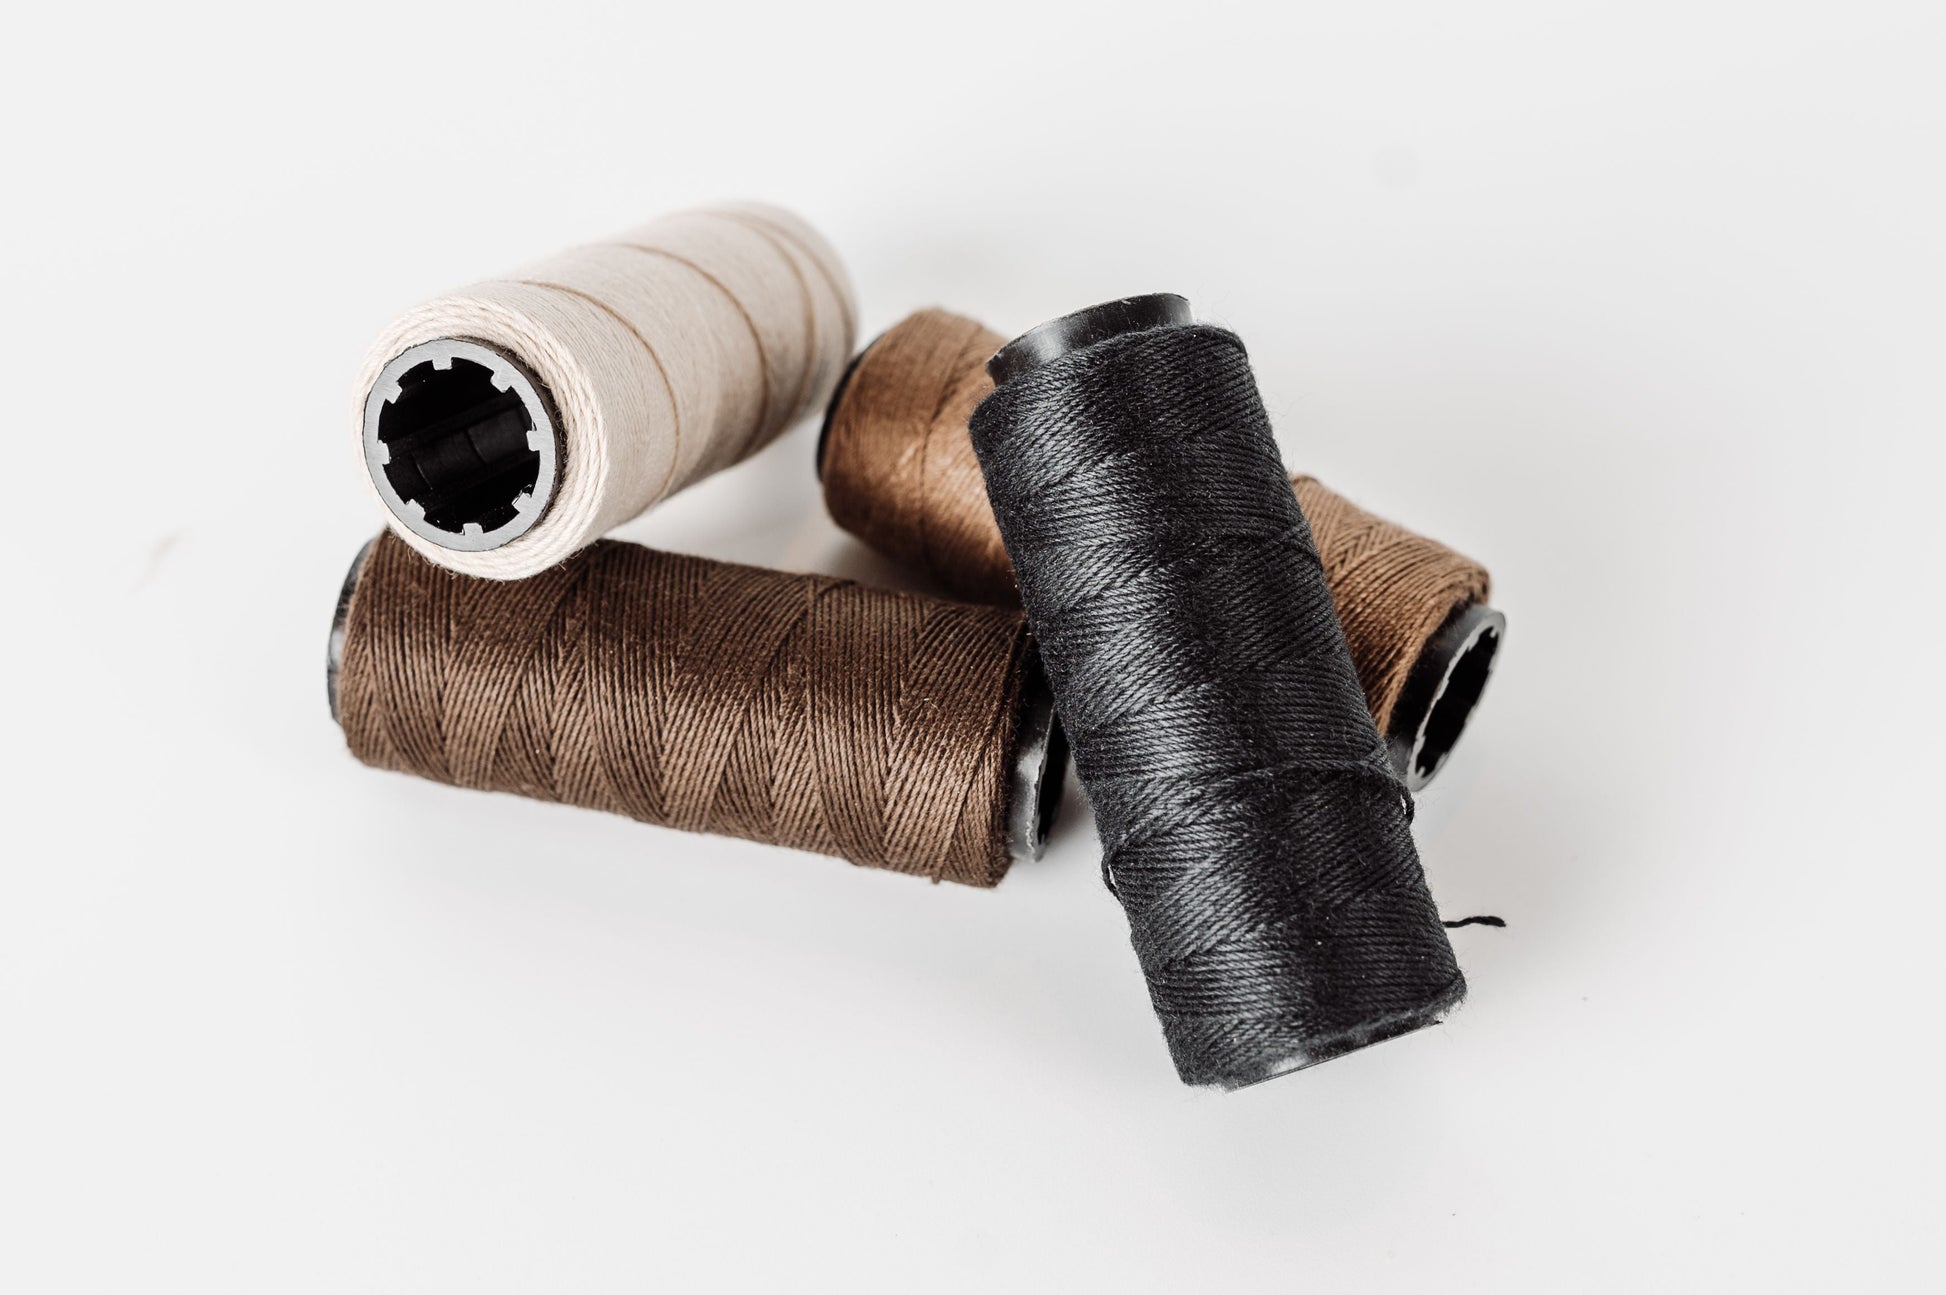  Ryalan UV Resistant High Strength Polyester Thread for  Upholstery, Outdoor Market, Drapery, Beading, Purses, Leather, Hair Weave  Bundles, Hair Extensions, Wig DIY Project 3 Rolls (3 Thread, Blond)